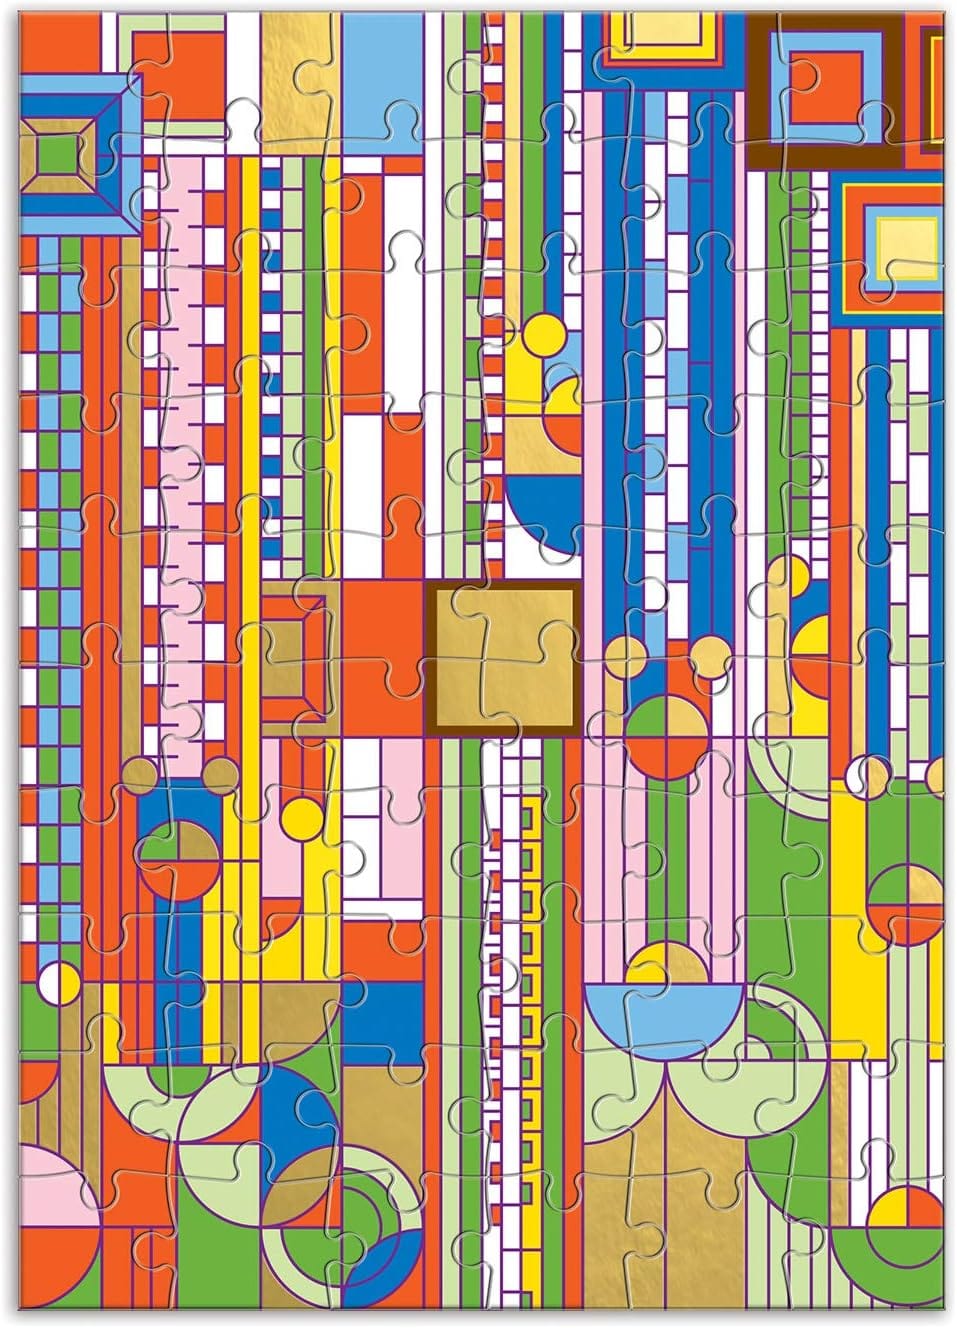 Playful Pastimes Frank Lloyd Wright Saguaro Forms & Cactus Flowers Greeting Card Puzzle, 60 Pieces